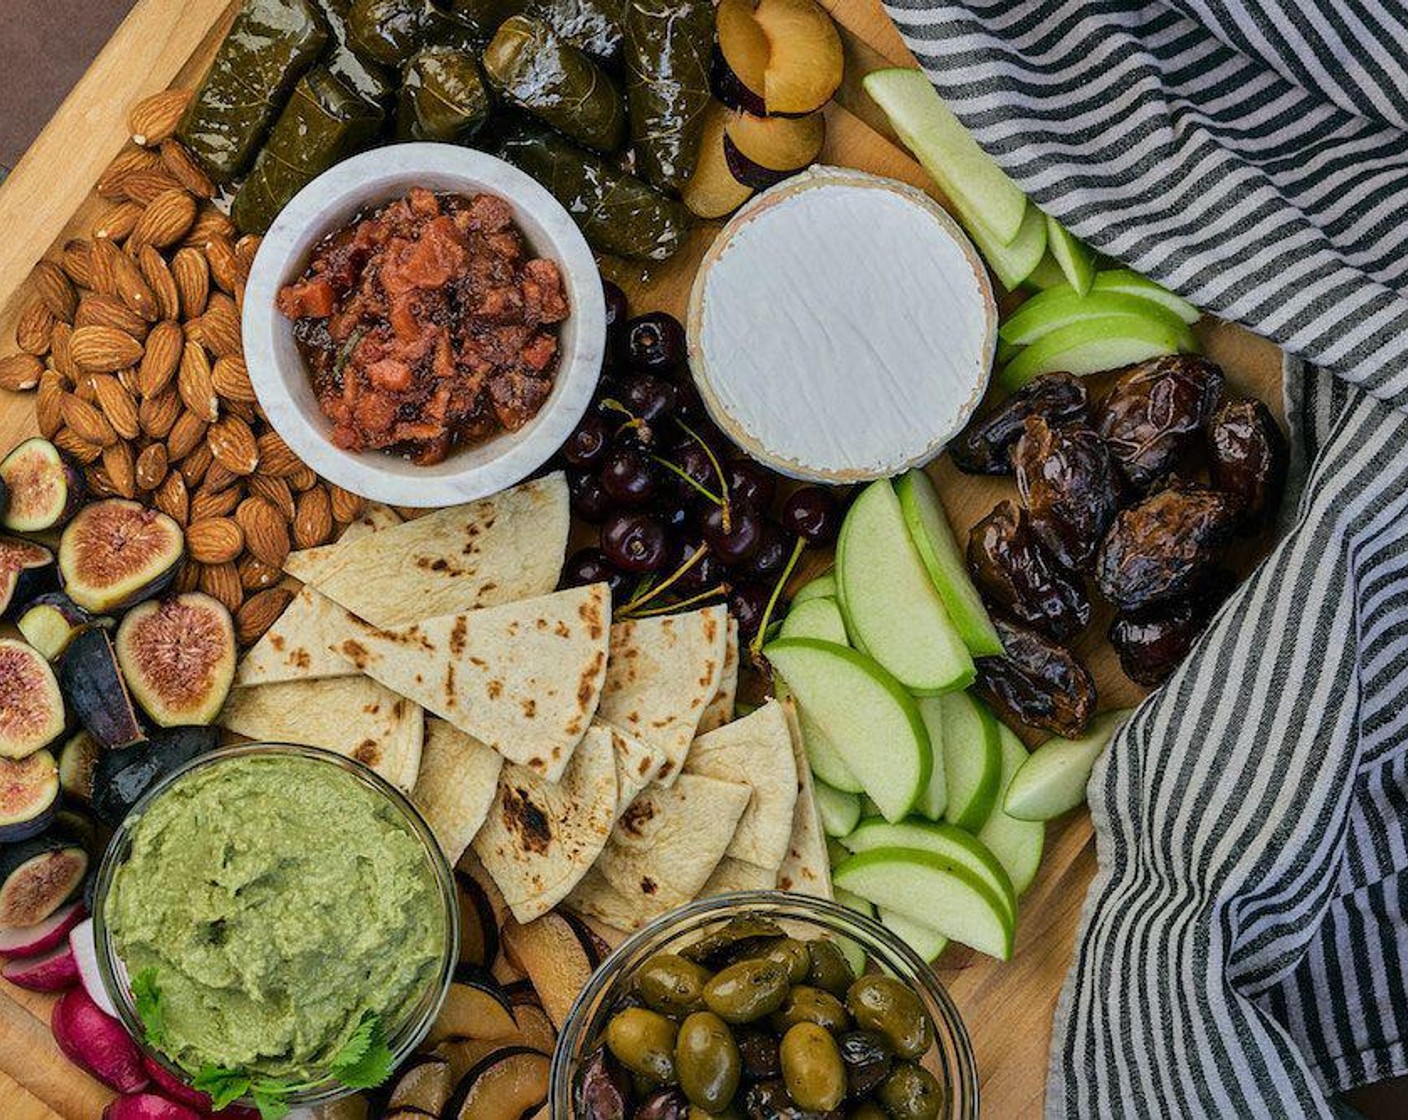 step 1 Place your Hummus (to taste), {@11:}, and Olives (1 2/3 cups) in small bowls. Disperse the Canned Stuffed Grape Leaves (1 2/3 cups), Apples (2), Goat Cheese (2/3 cup), Flatbread (8), Plums (2), Cherry (1 cup), Almonds (1 cup), Dried Dates (8), and {@10:} on a large, wooden board. See photo for inspiration.